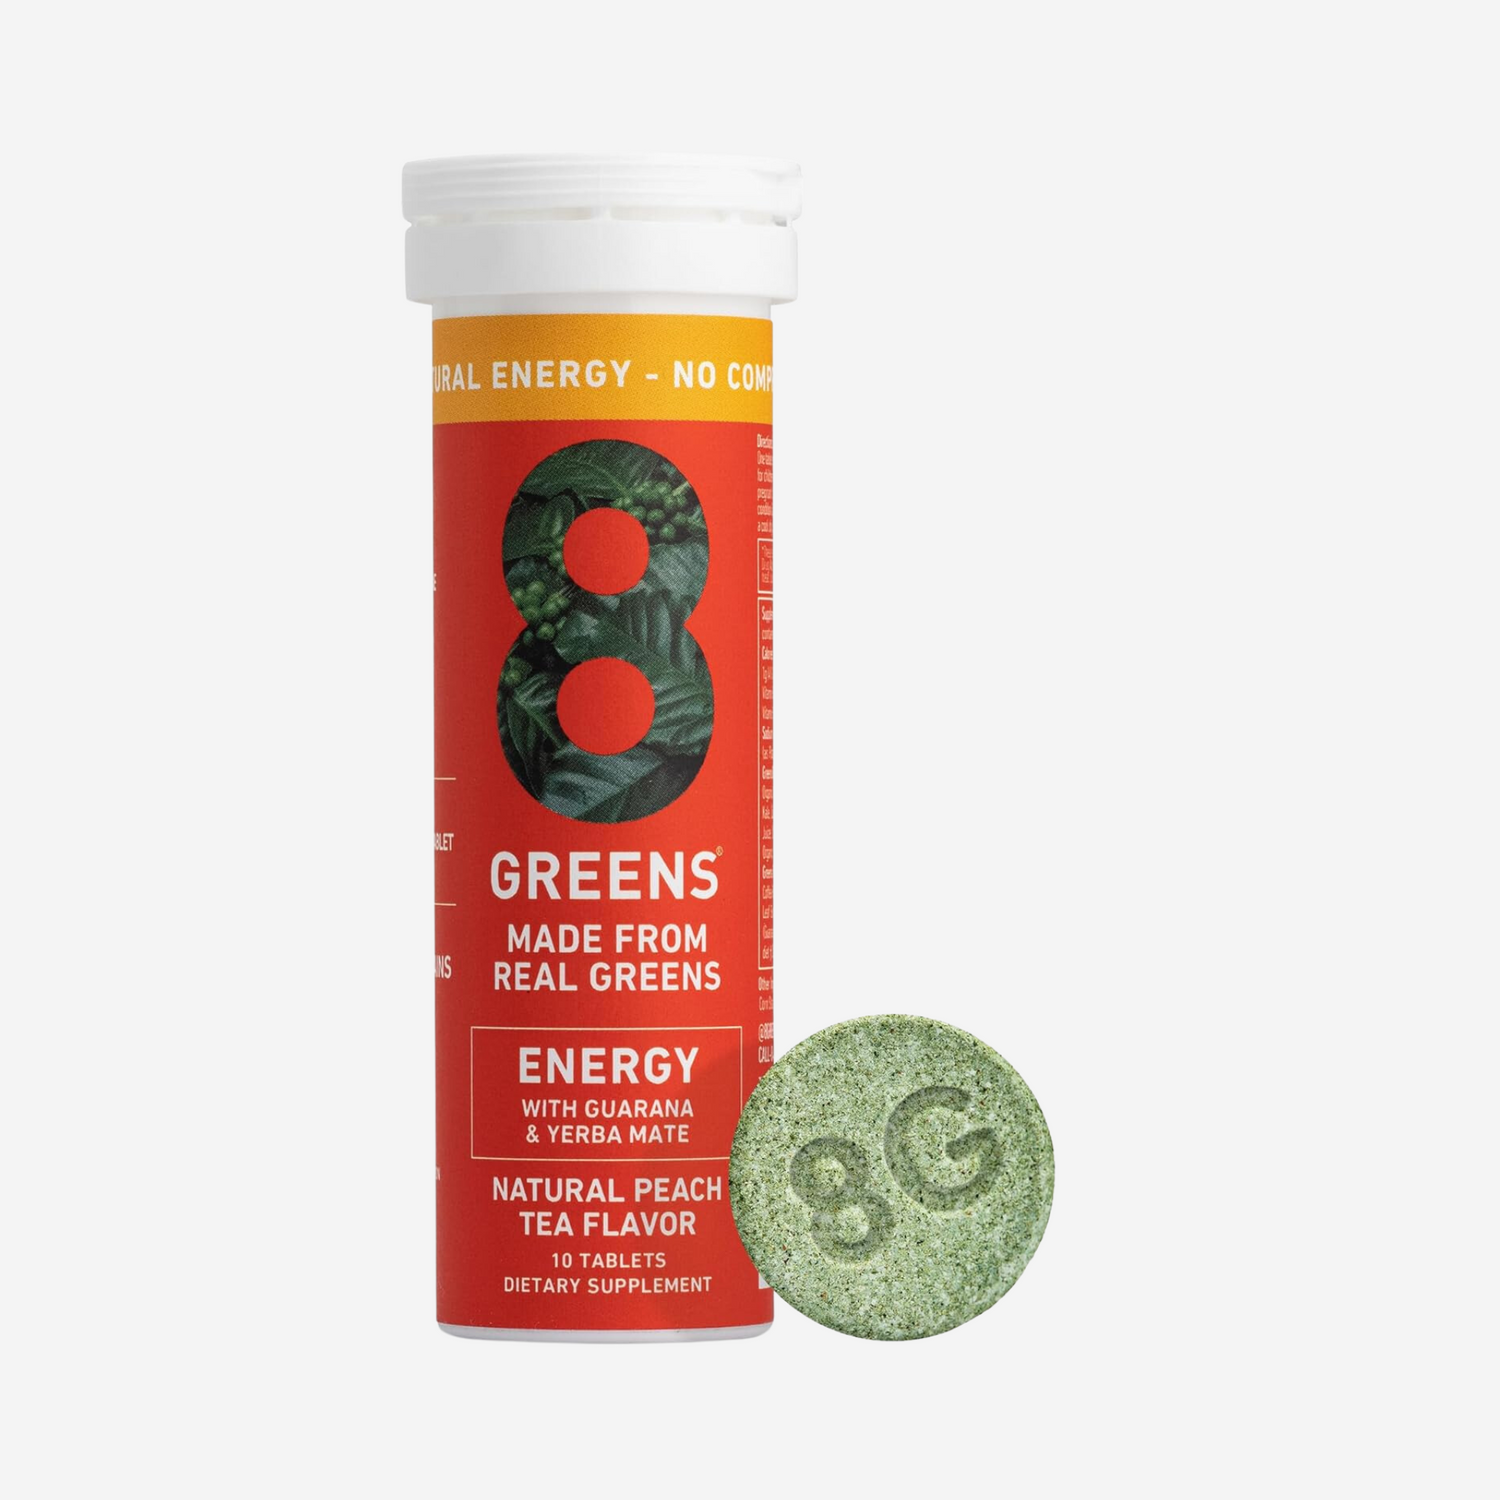 8Greens Daily Greens Energy Effervescent Tablets - Natural Energy Boost